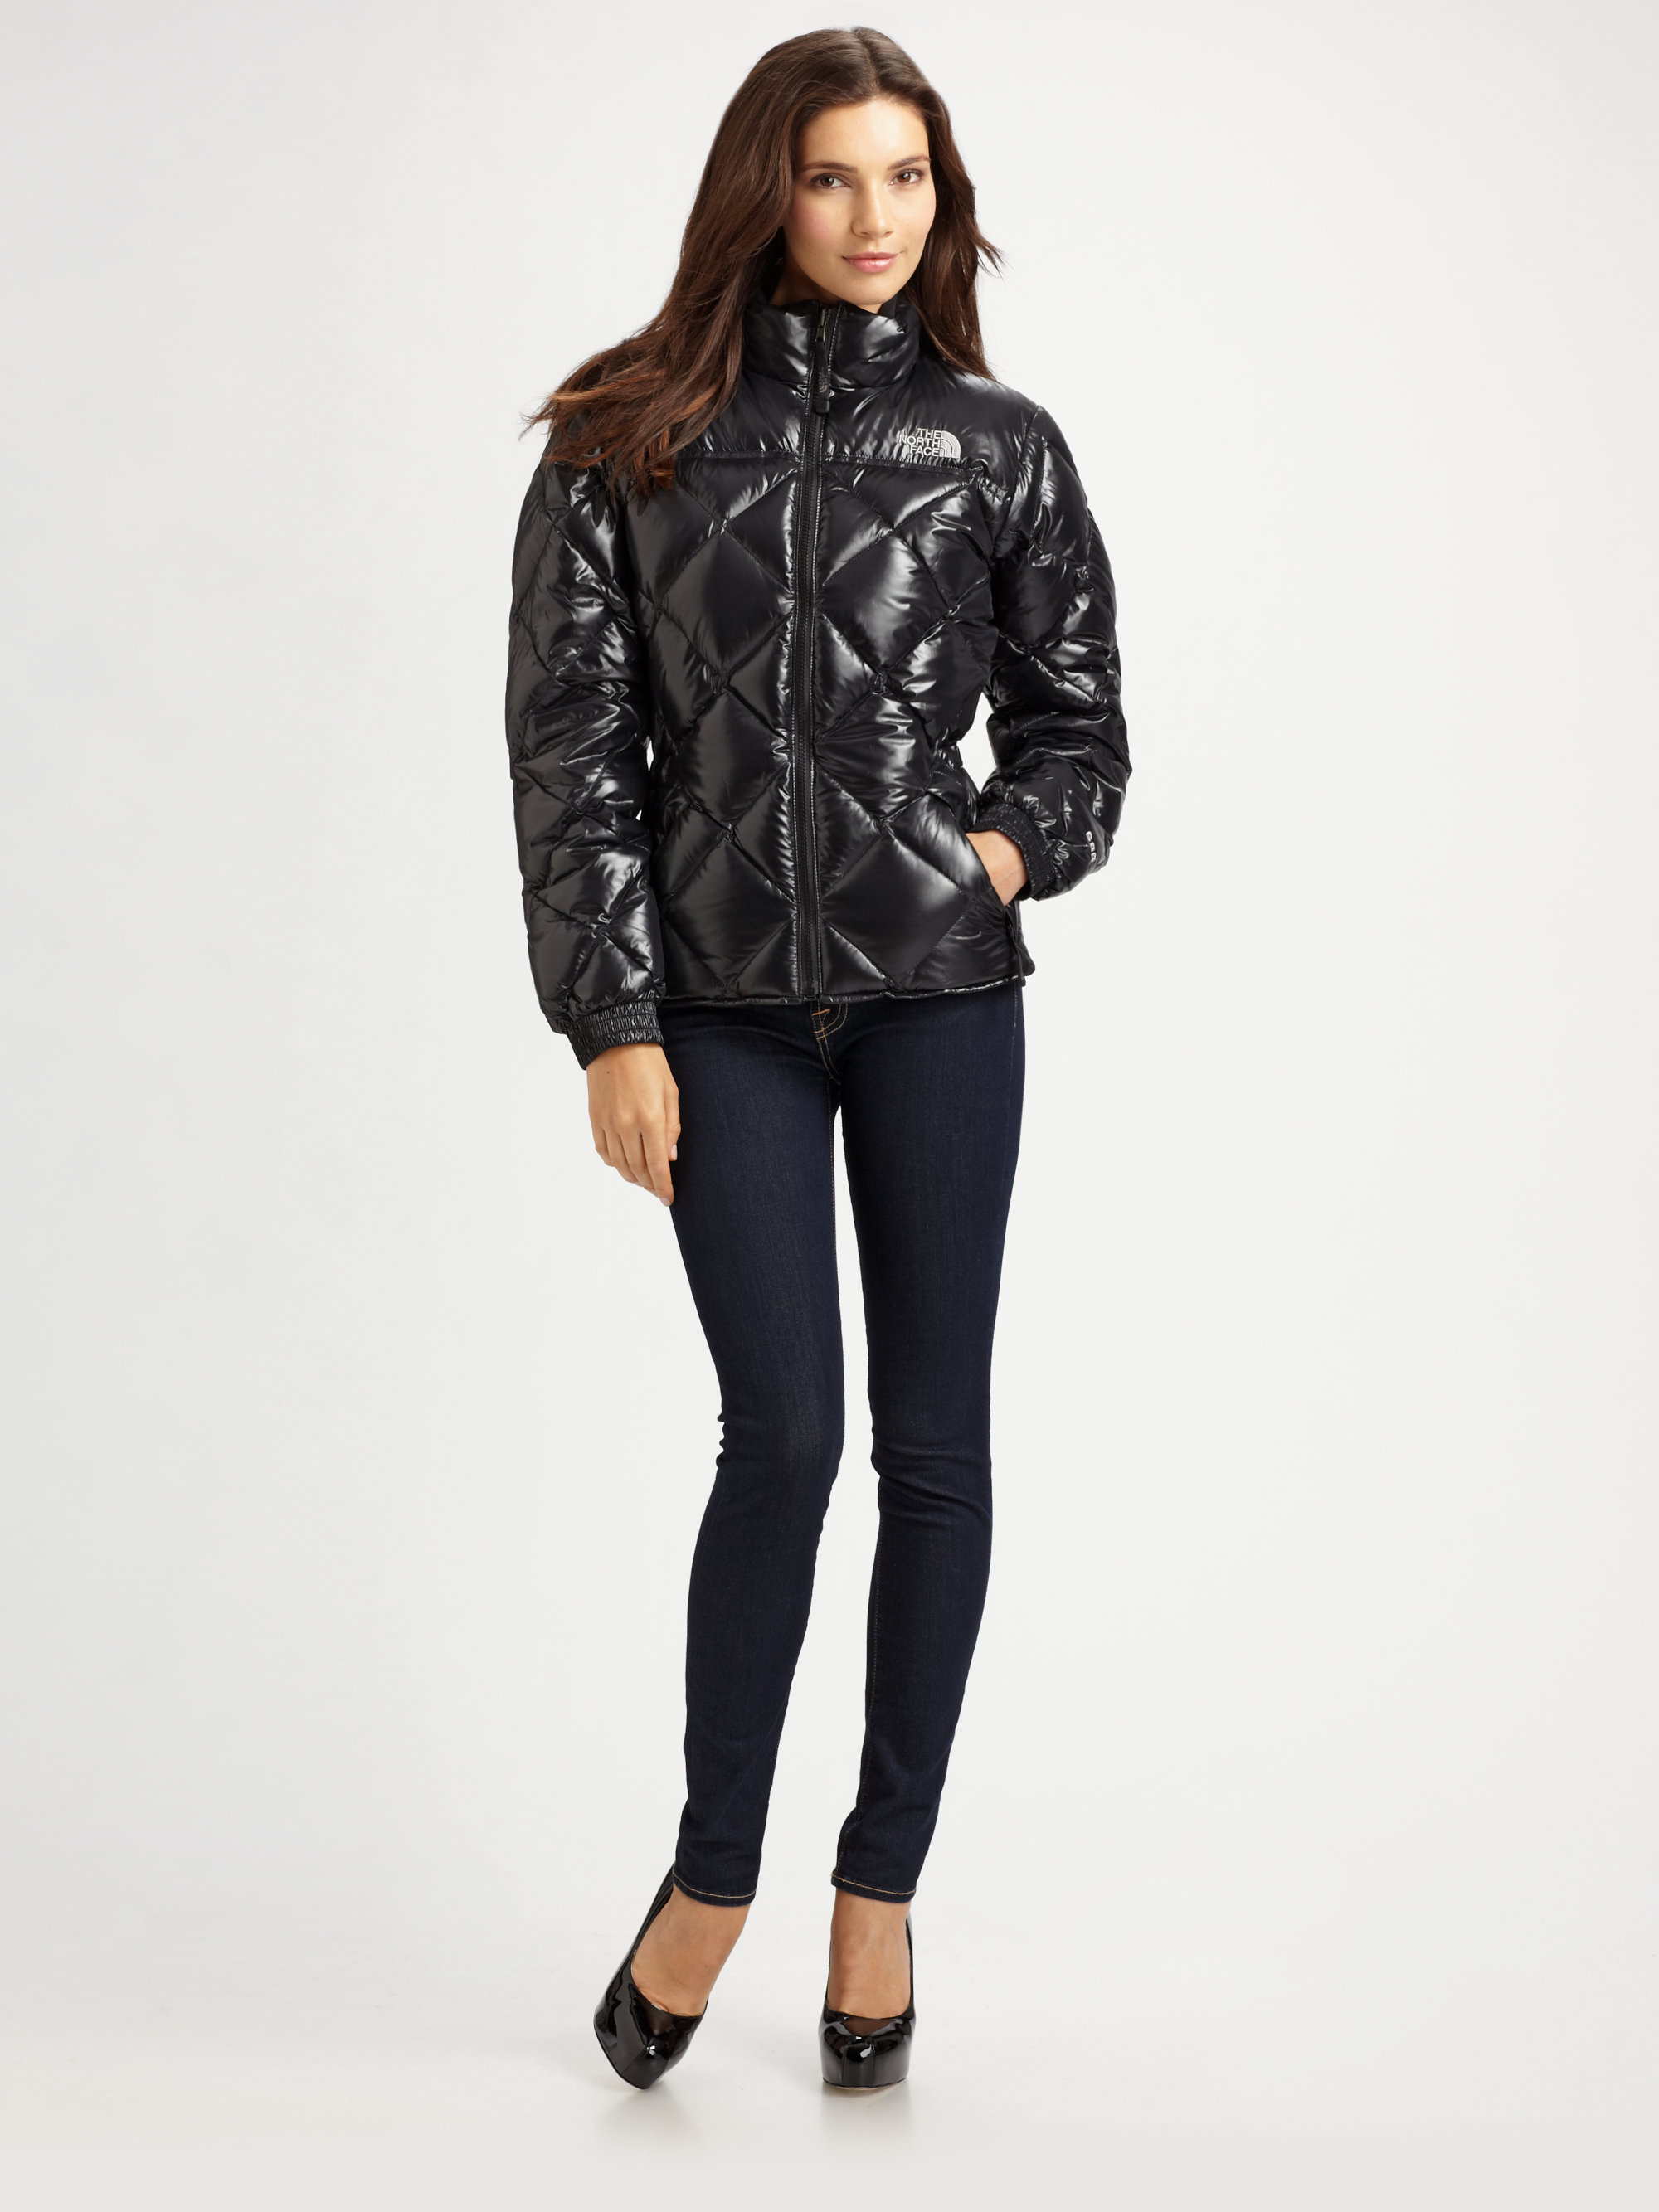 North Face Quilted Puffer Jacket Flash Sales, SAVE 40% - eagleflair.com